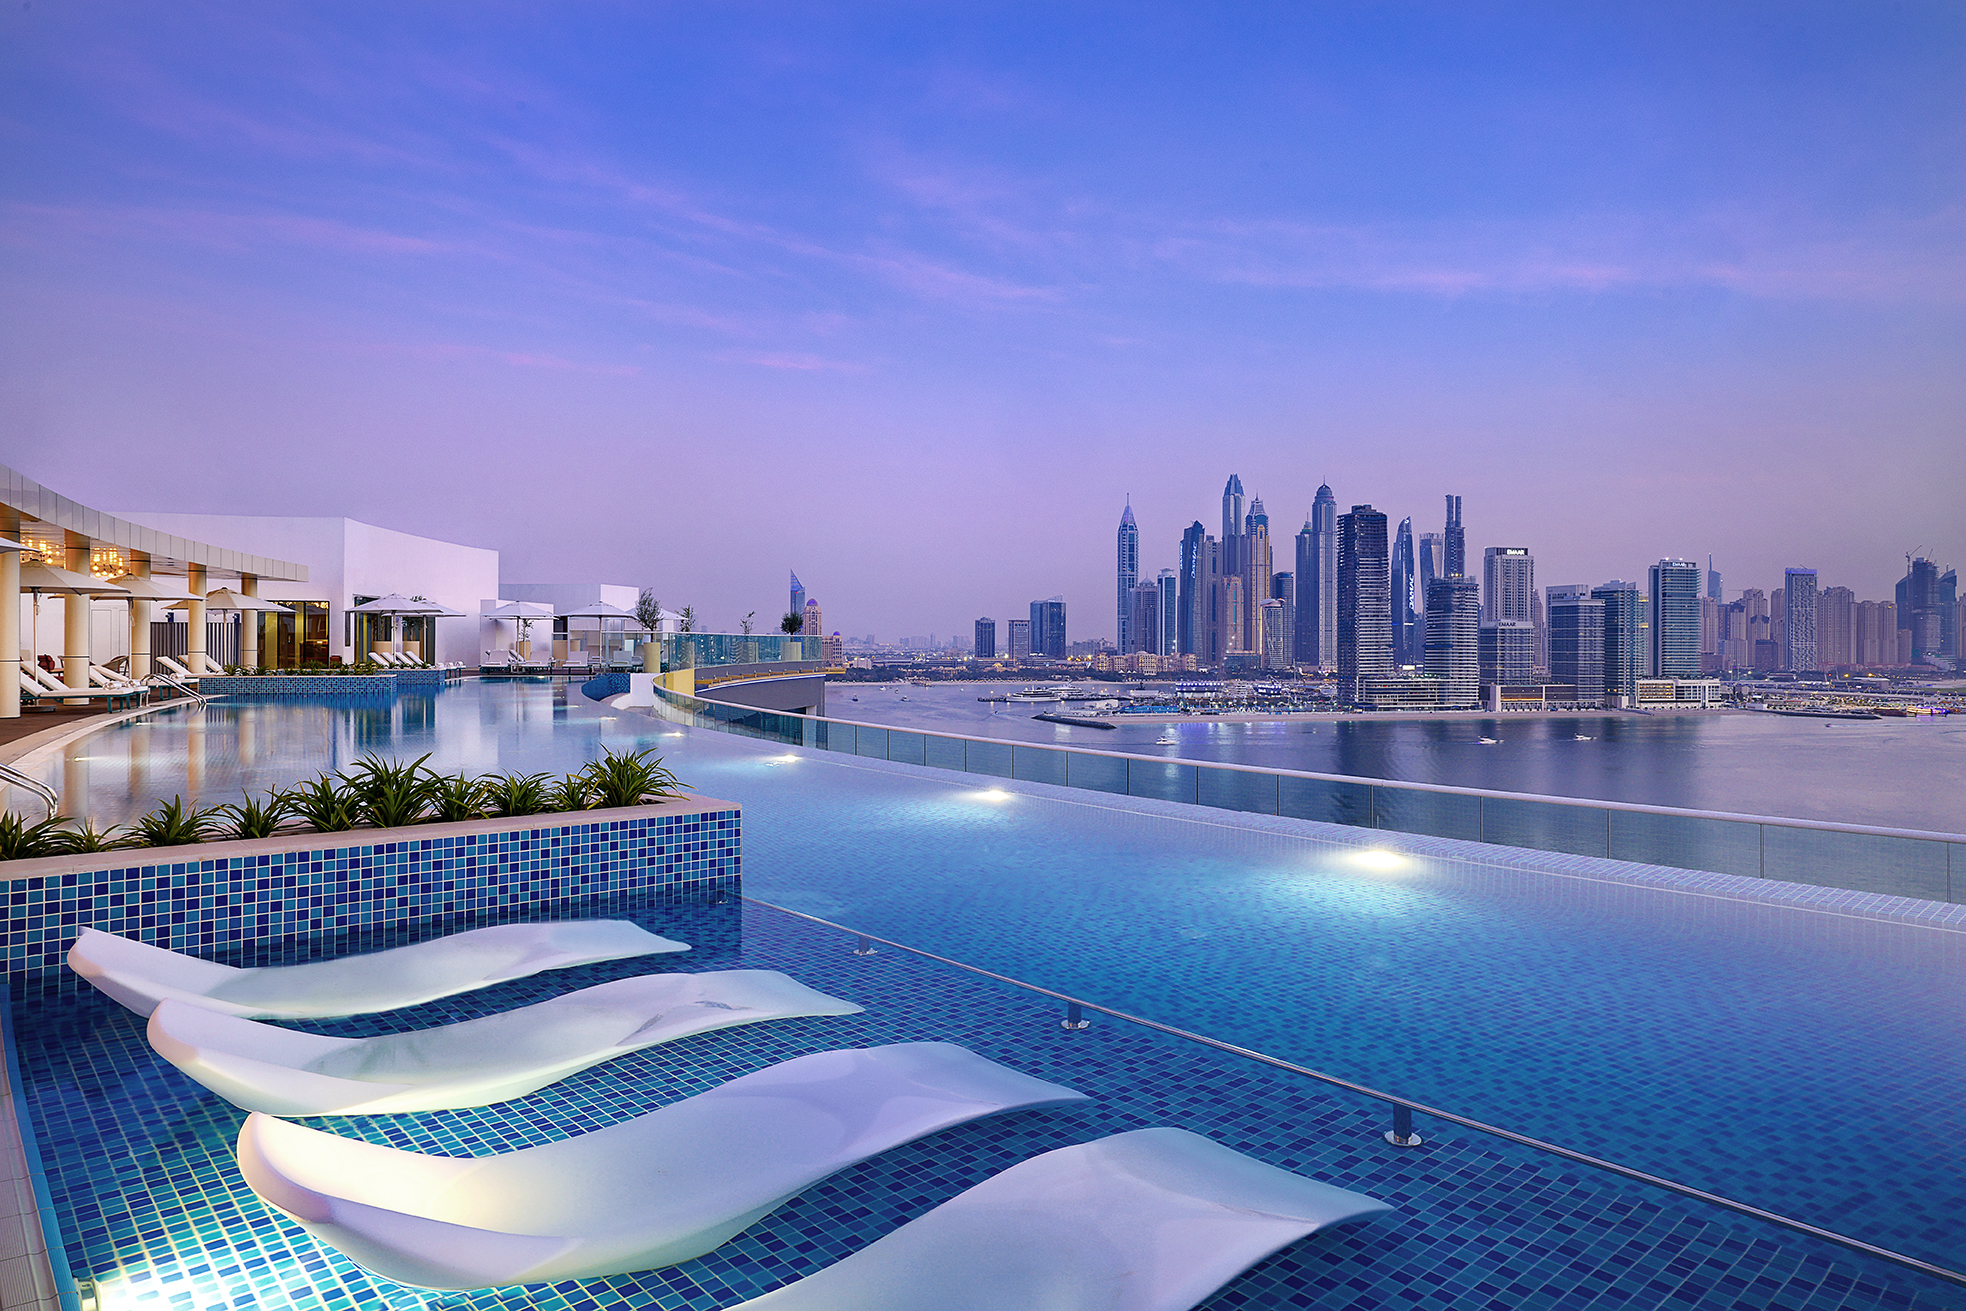 The NH Collection Dubai The Palm, whichmarksthefirstproperty of thebrand in theMiddleEast, has beenlaunched.